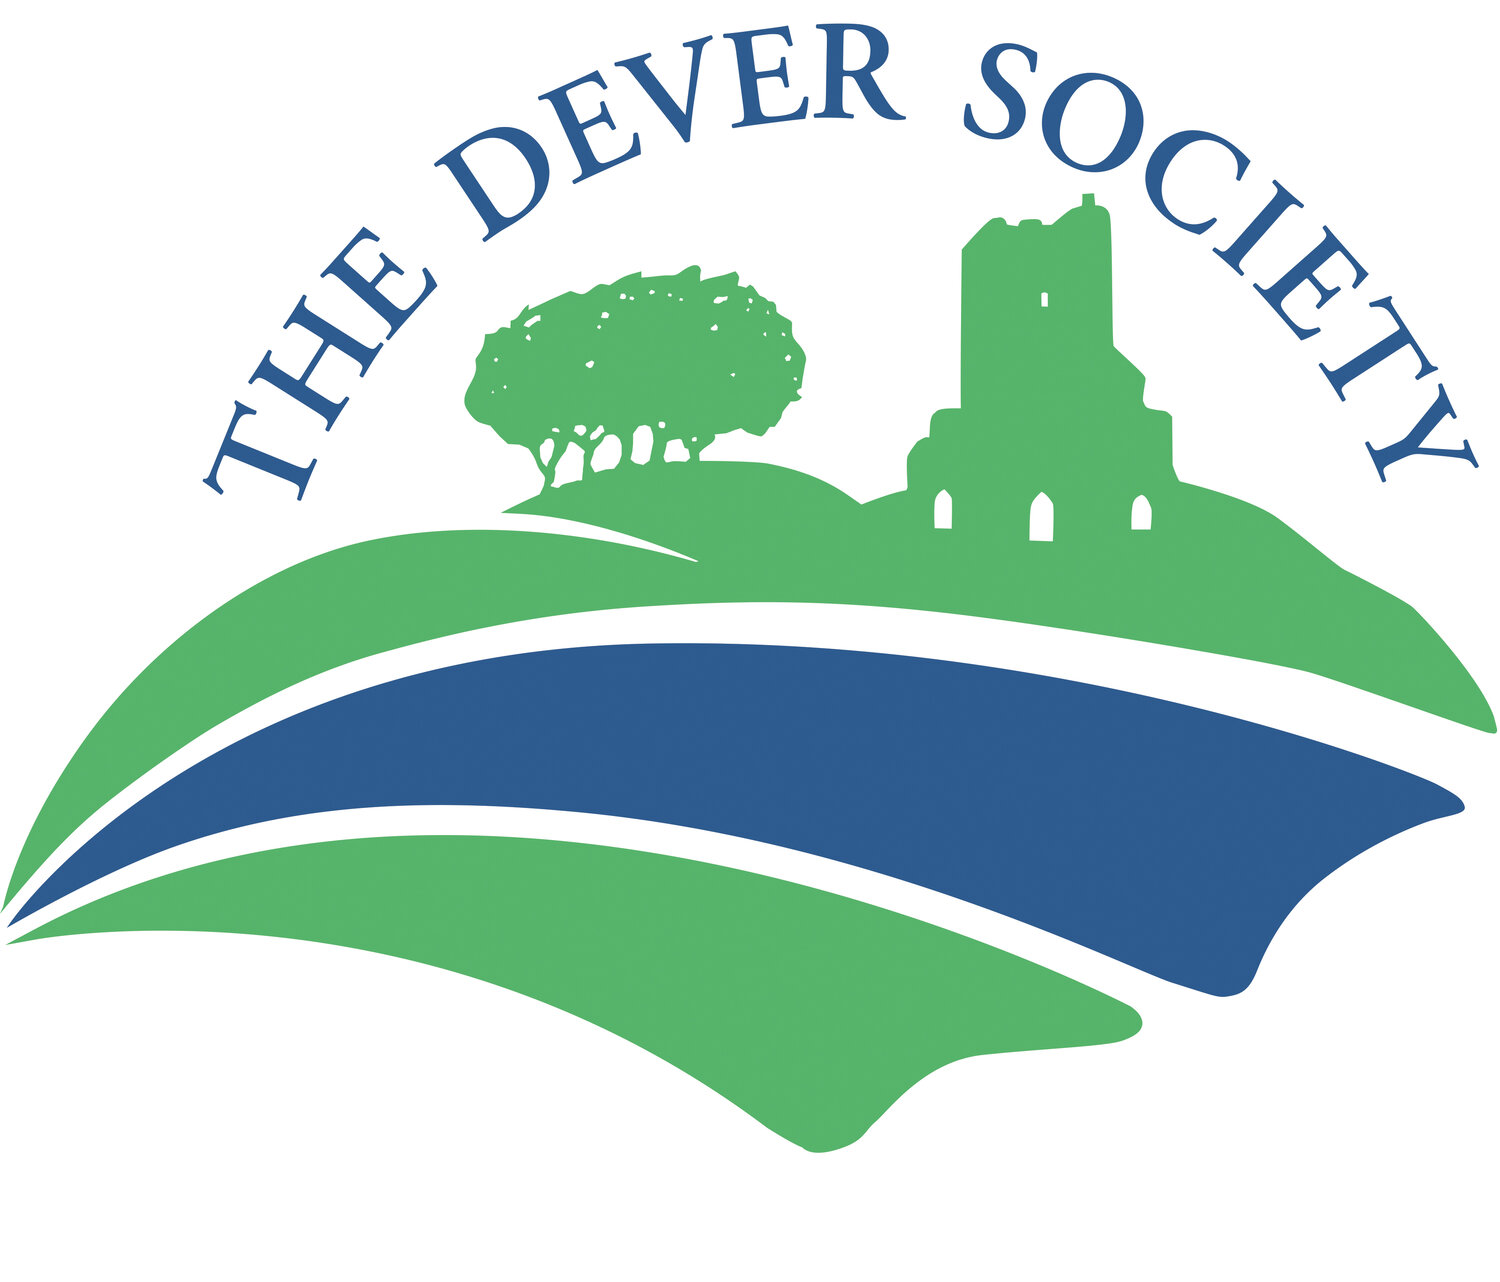 The Dever Society